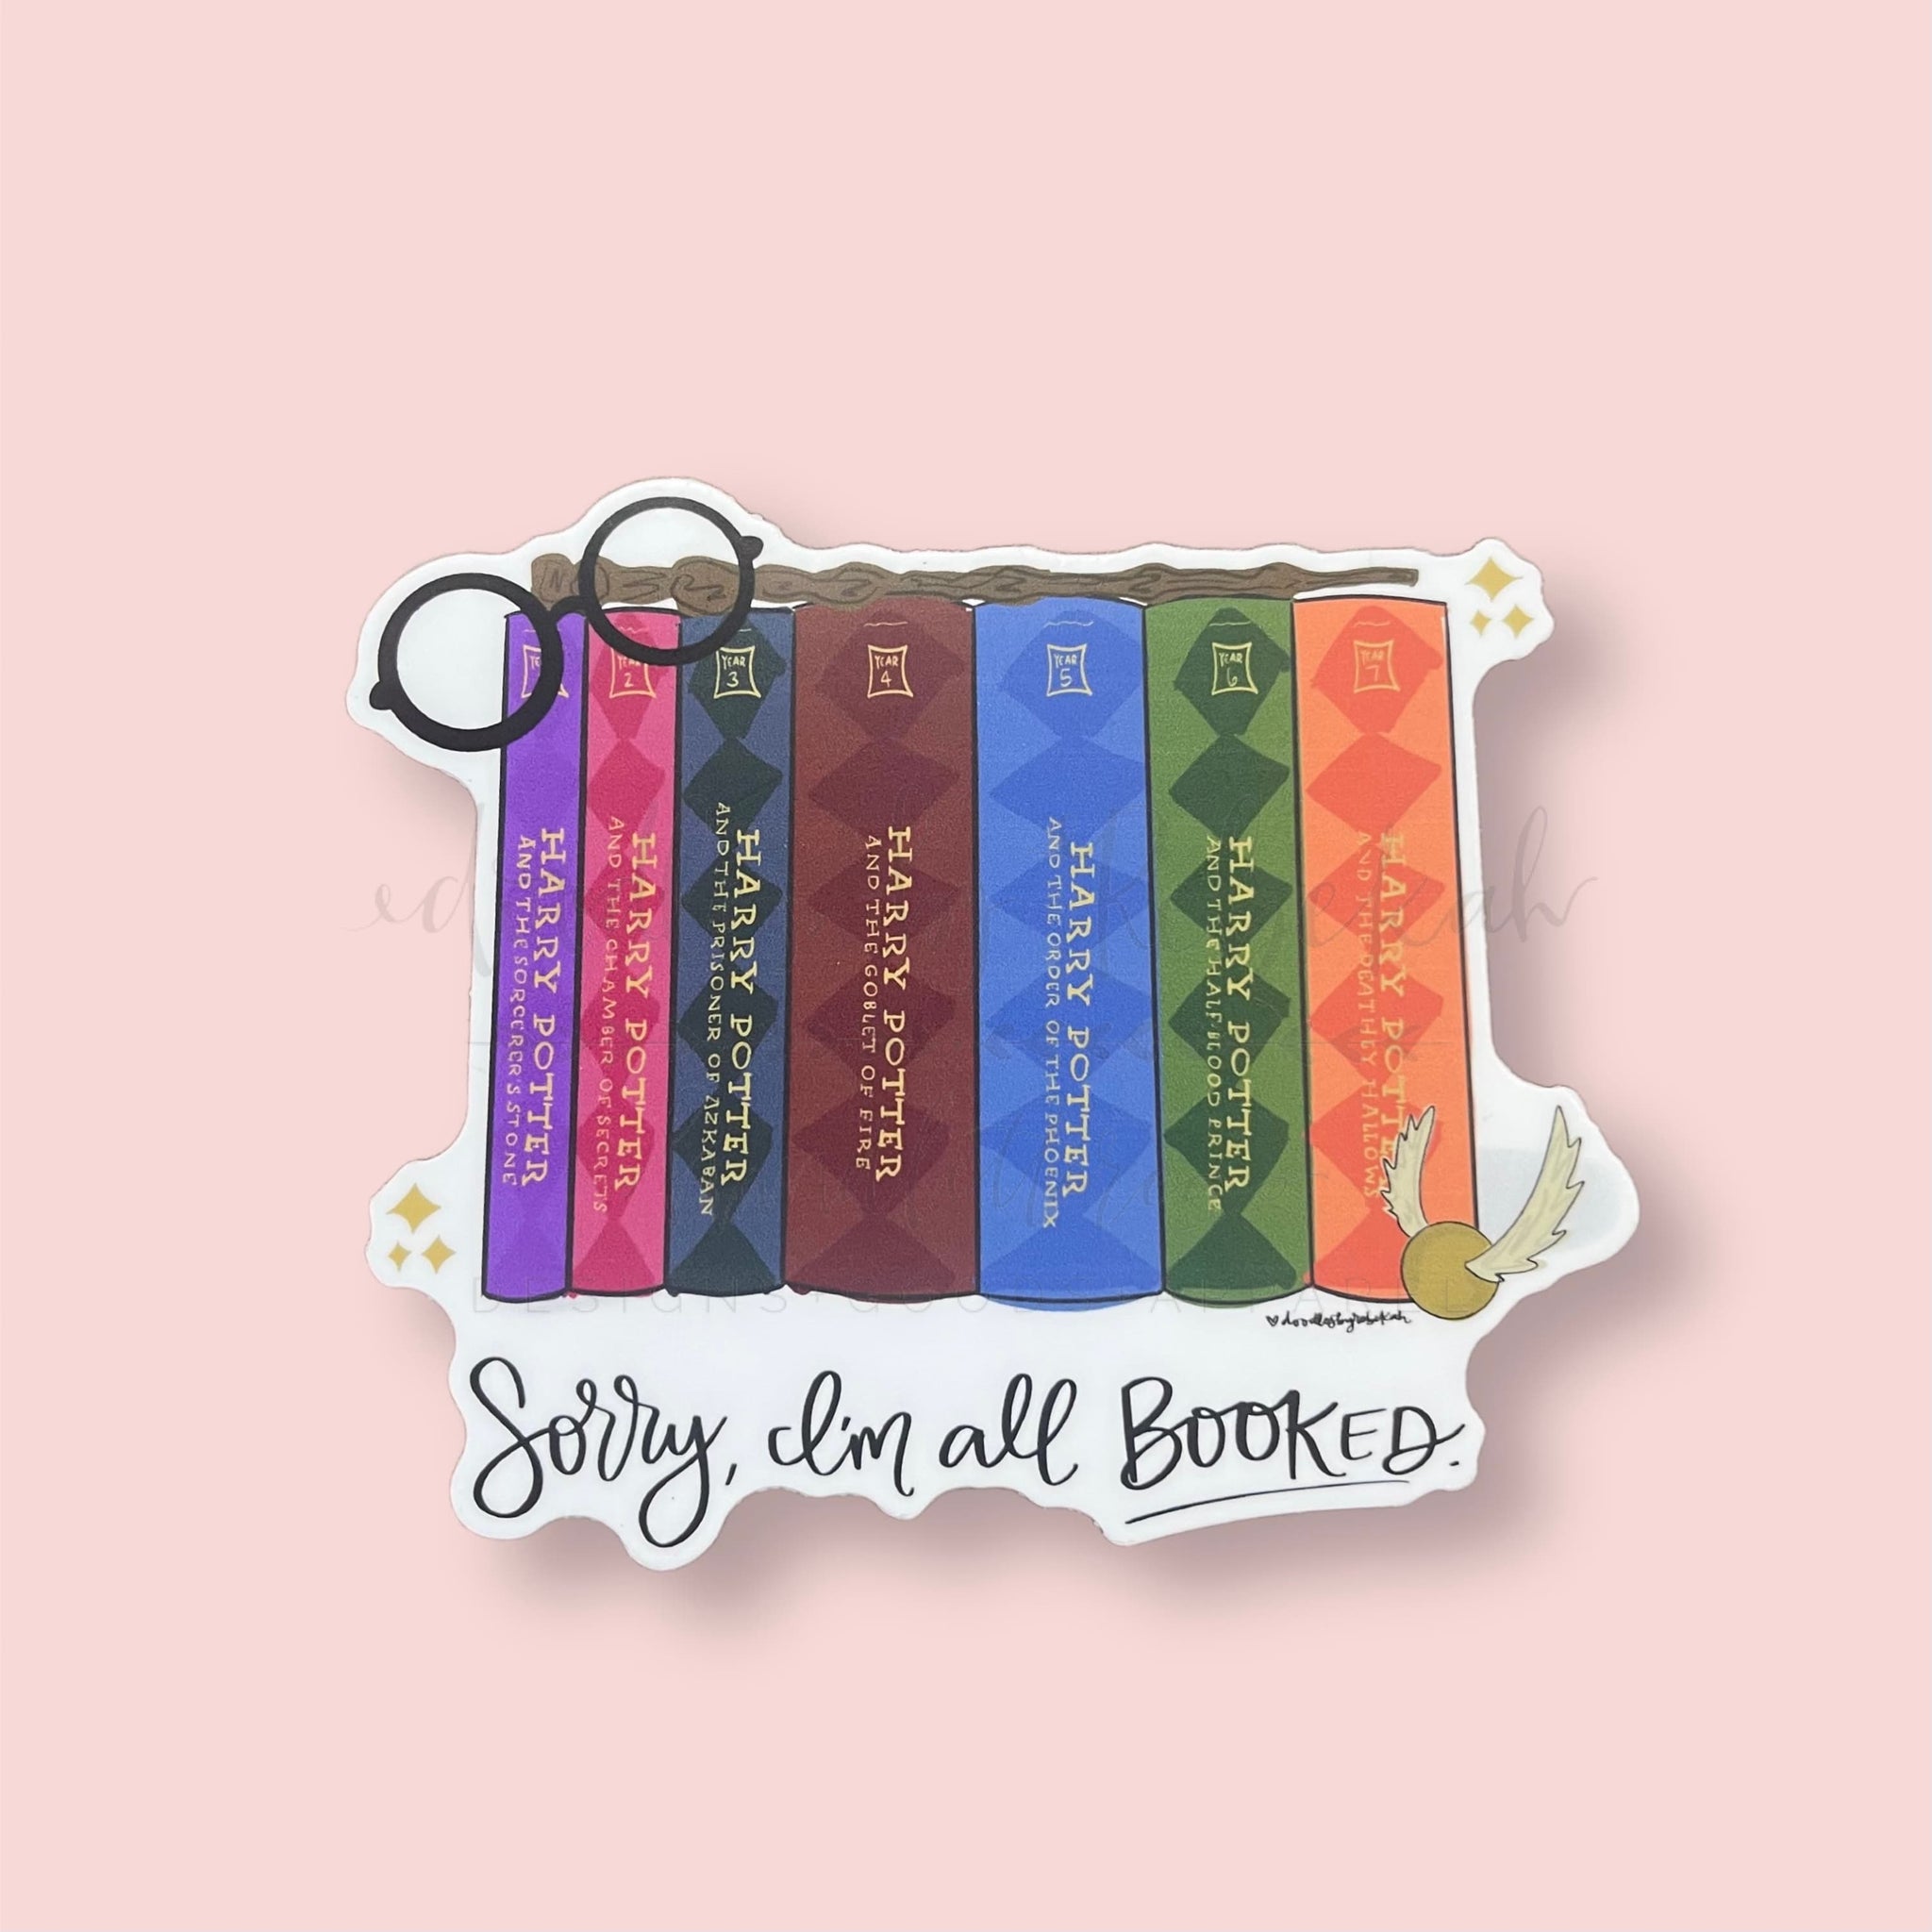 Doodles by Rebekah - Sorry, I'm Booked (Harry Potter) Sticker